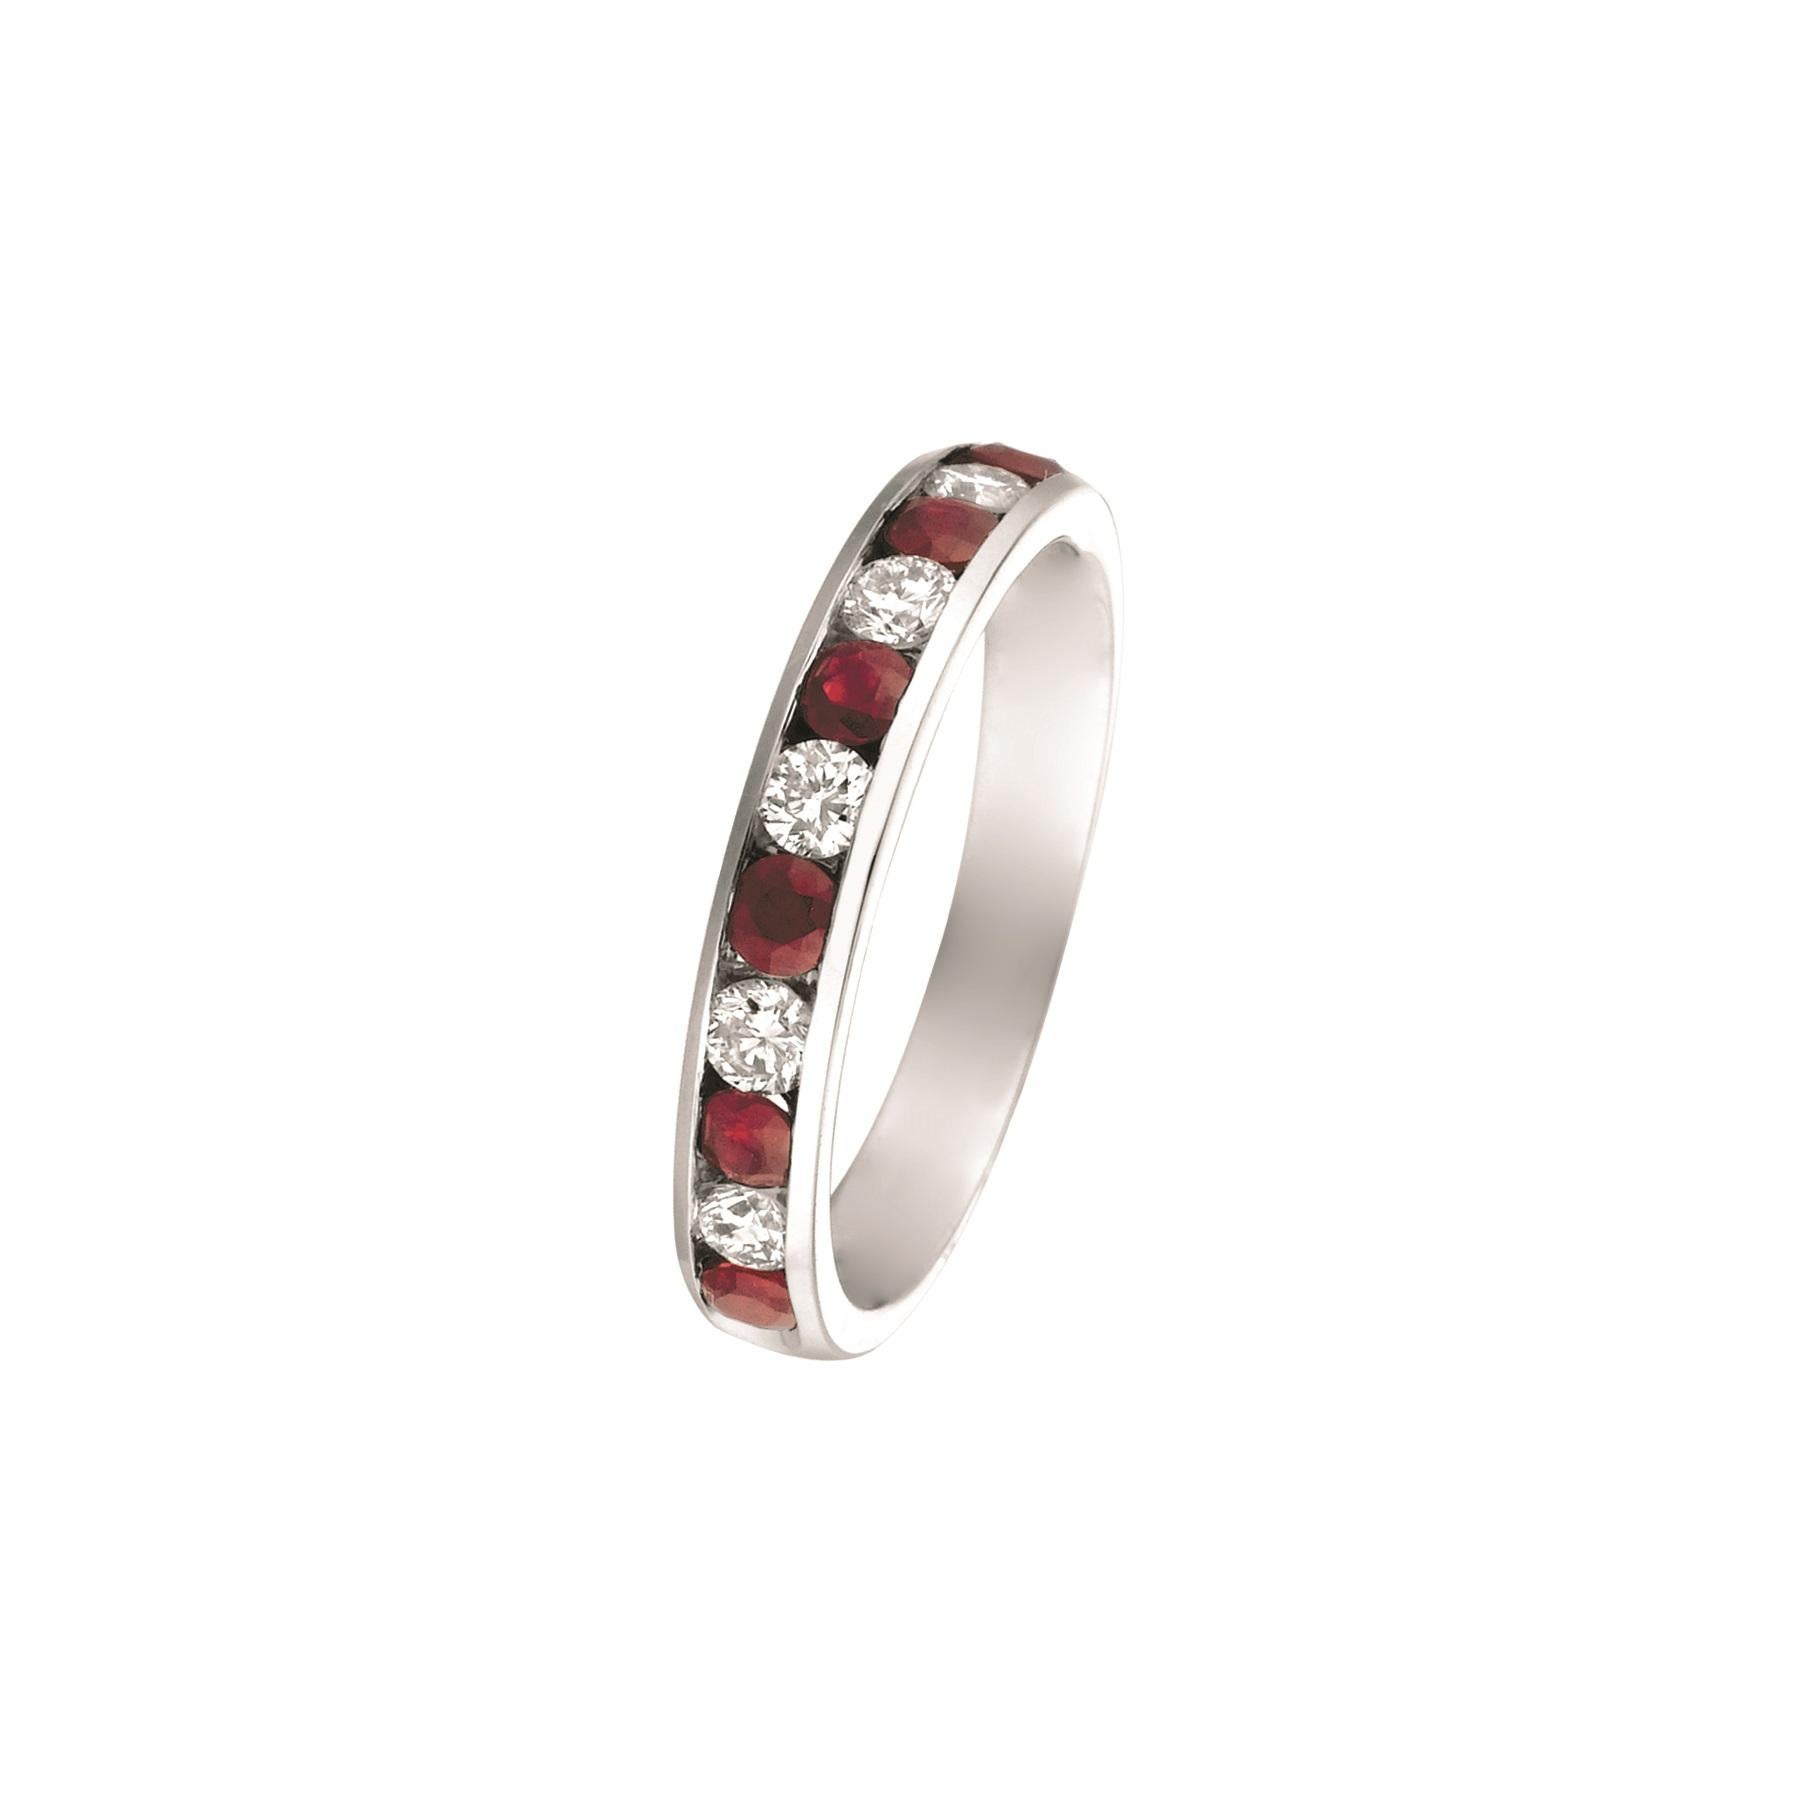 1.10 Carat Natural Diamond and Ruby Ring G SI 14K White Gold

100% Natural Diamonds and Rubies
1.10CTW
G-H
SI
14K White Gold Channel set, 2.50 grams
3.5 mm in width
Size 7
5 diamonds - 0.37ct, 6 rubies -0.73ct

R7173WDR

ALL OUR ITEMS ARE AVAILABLE